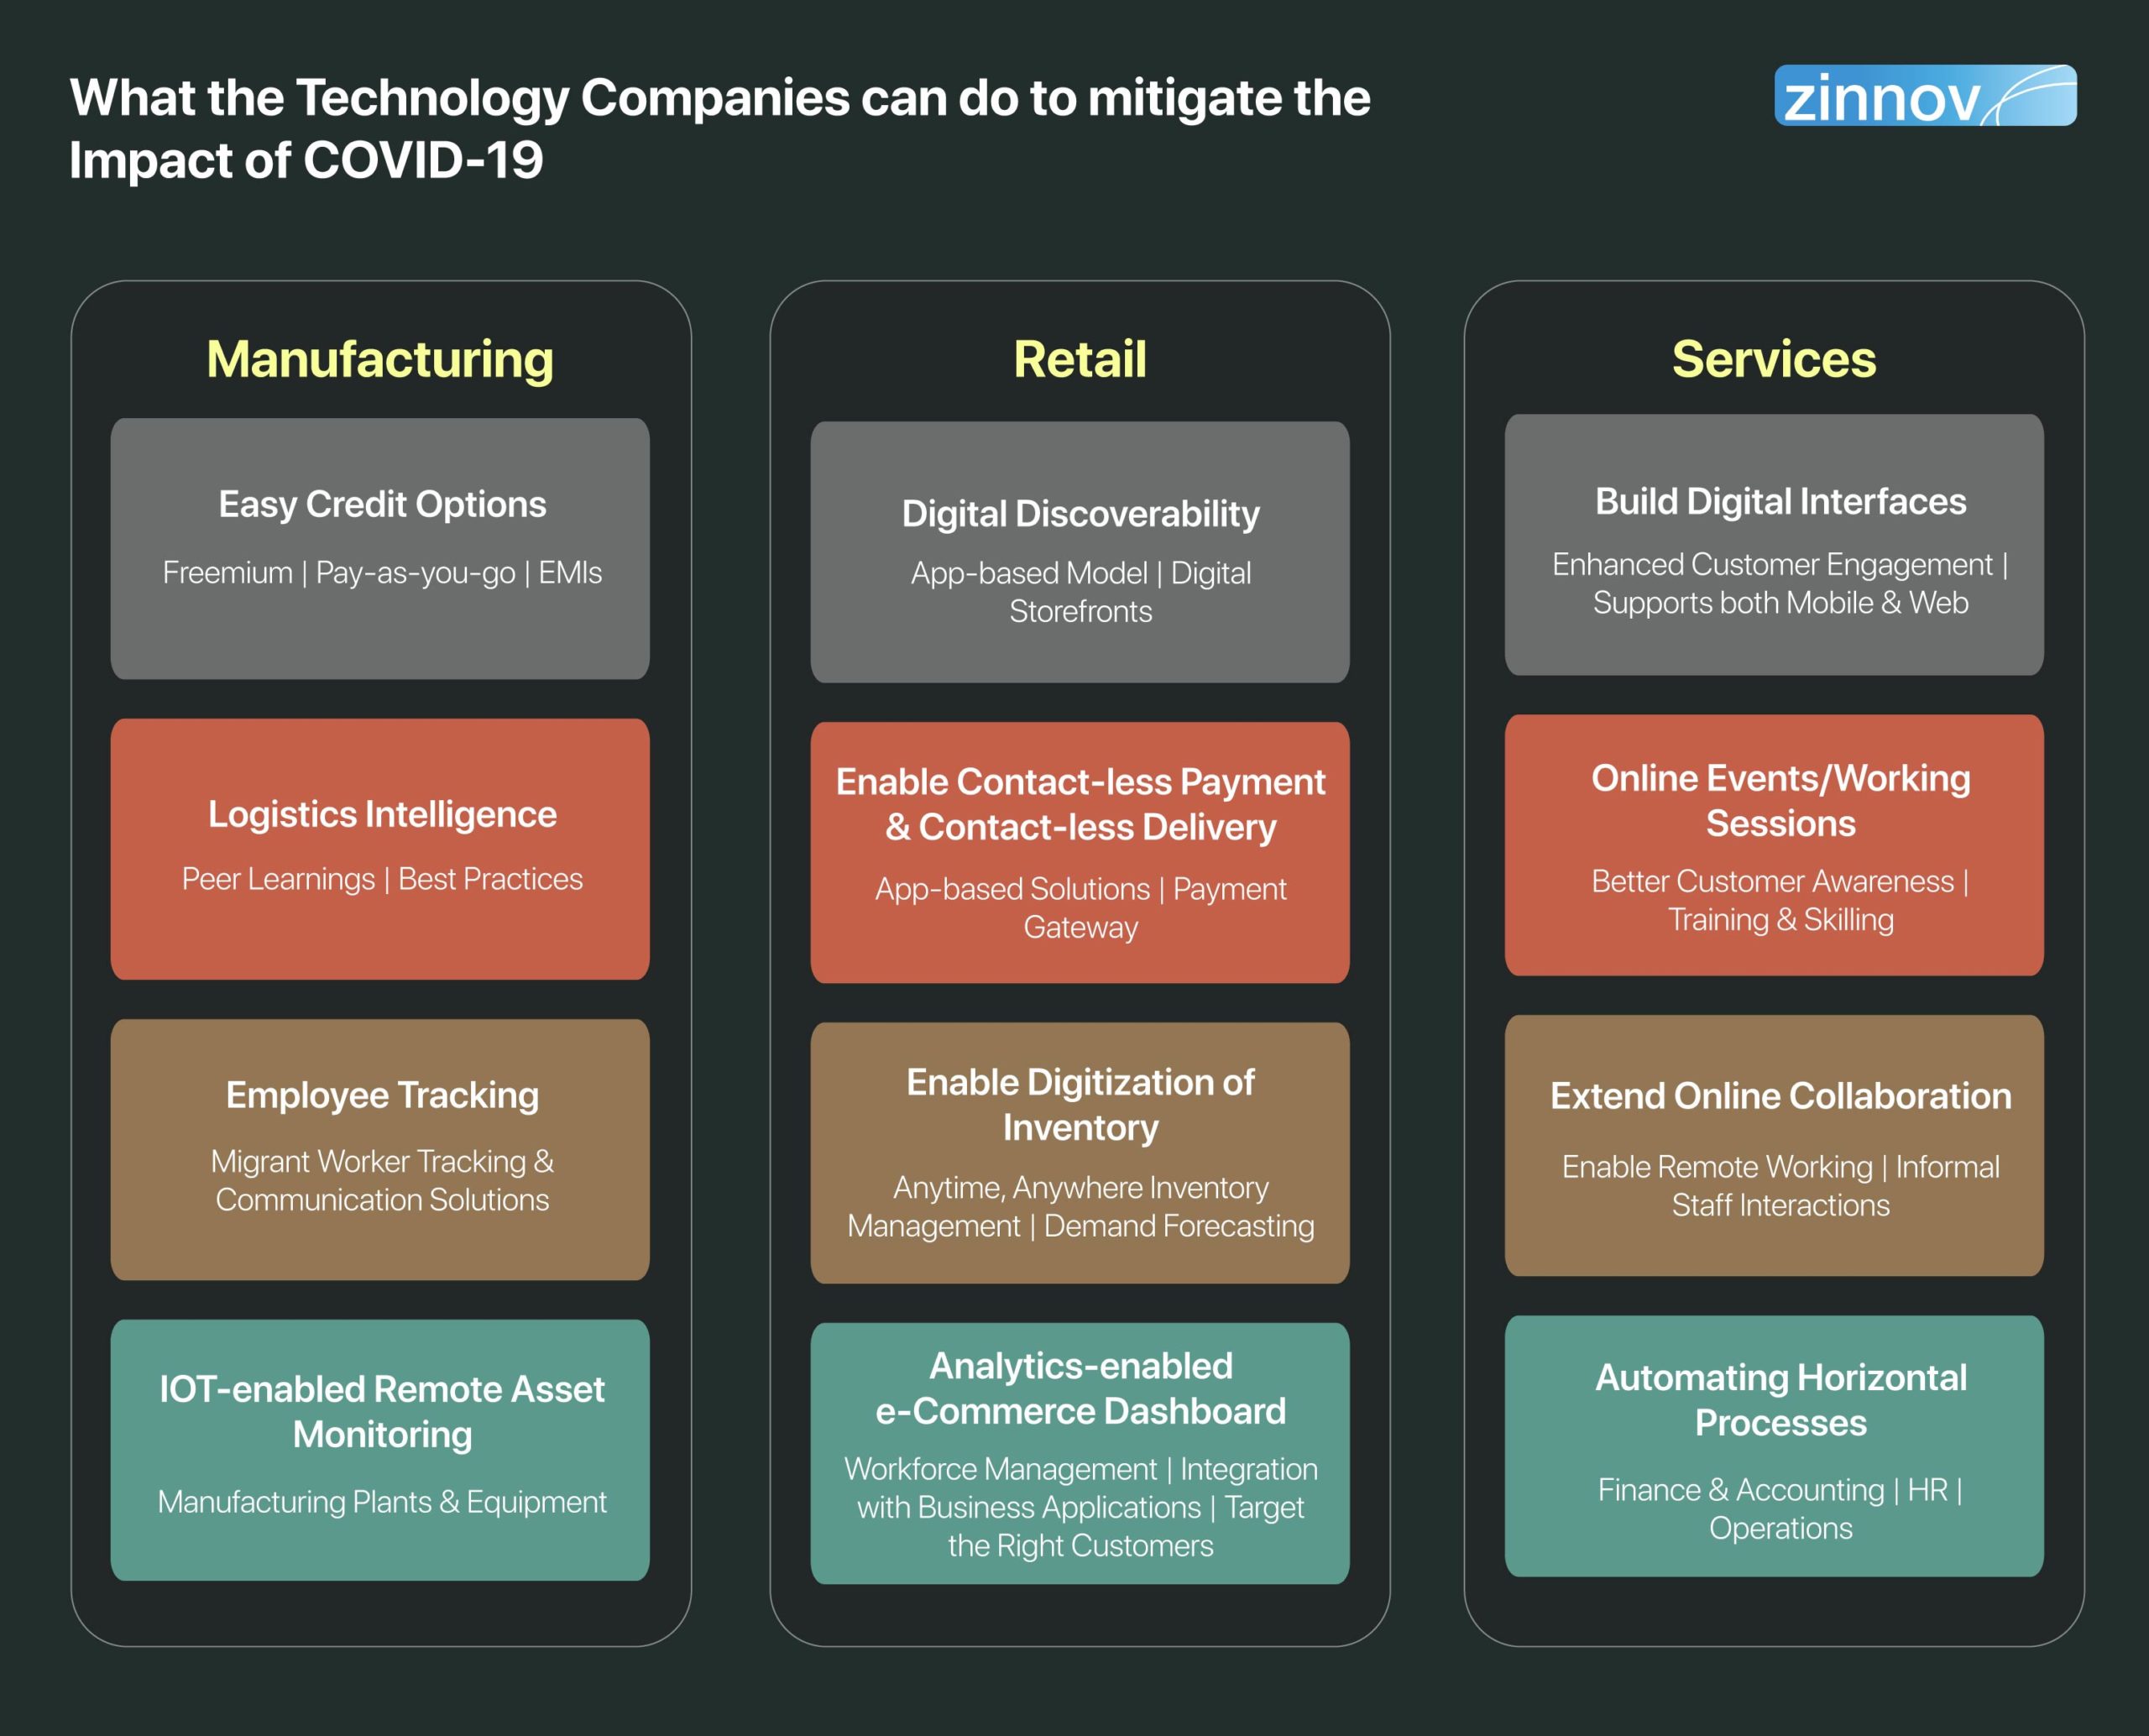 What the Technology Companies can do to mitigate the impact of COVID-19